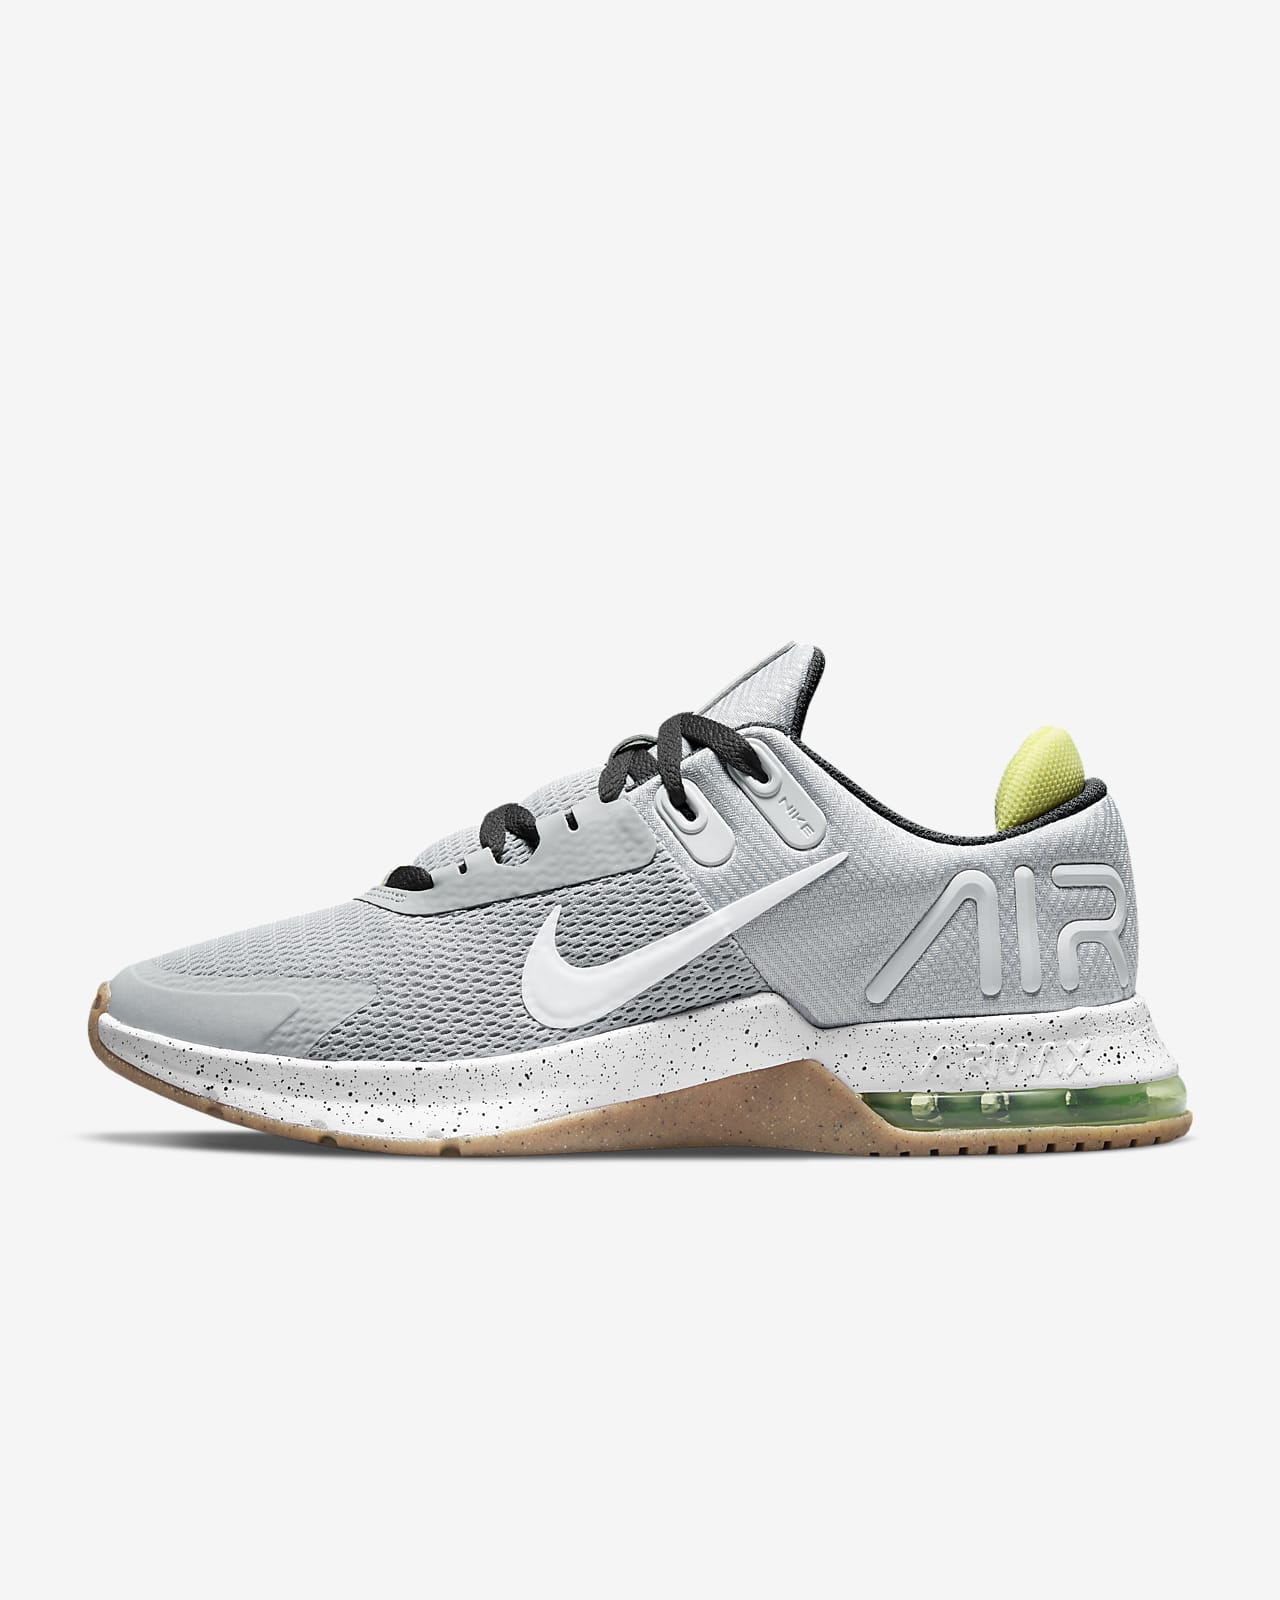 Nike Air Max Alpha Trainer 5 Men's Workout Shoes.